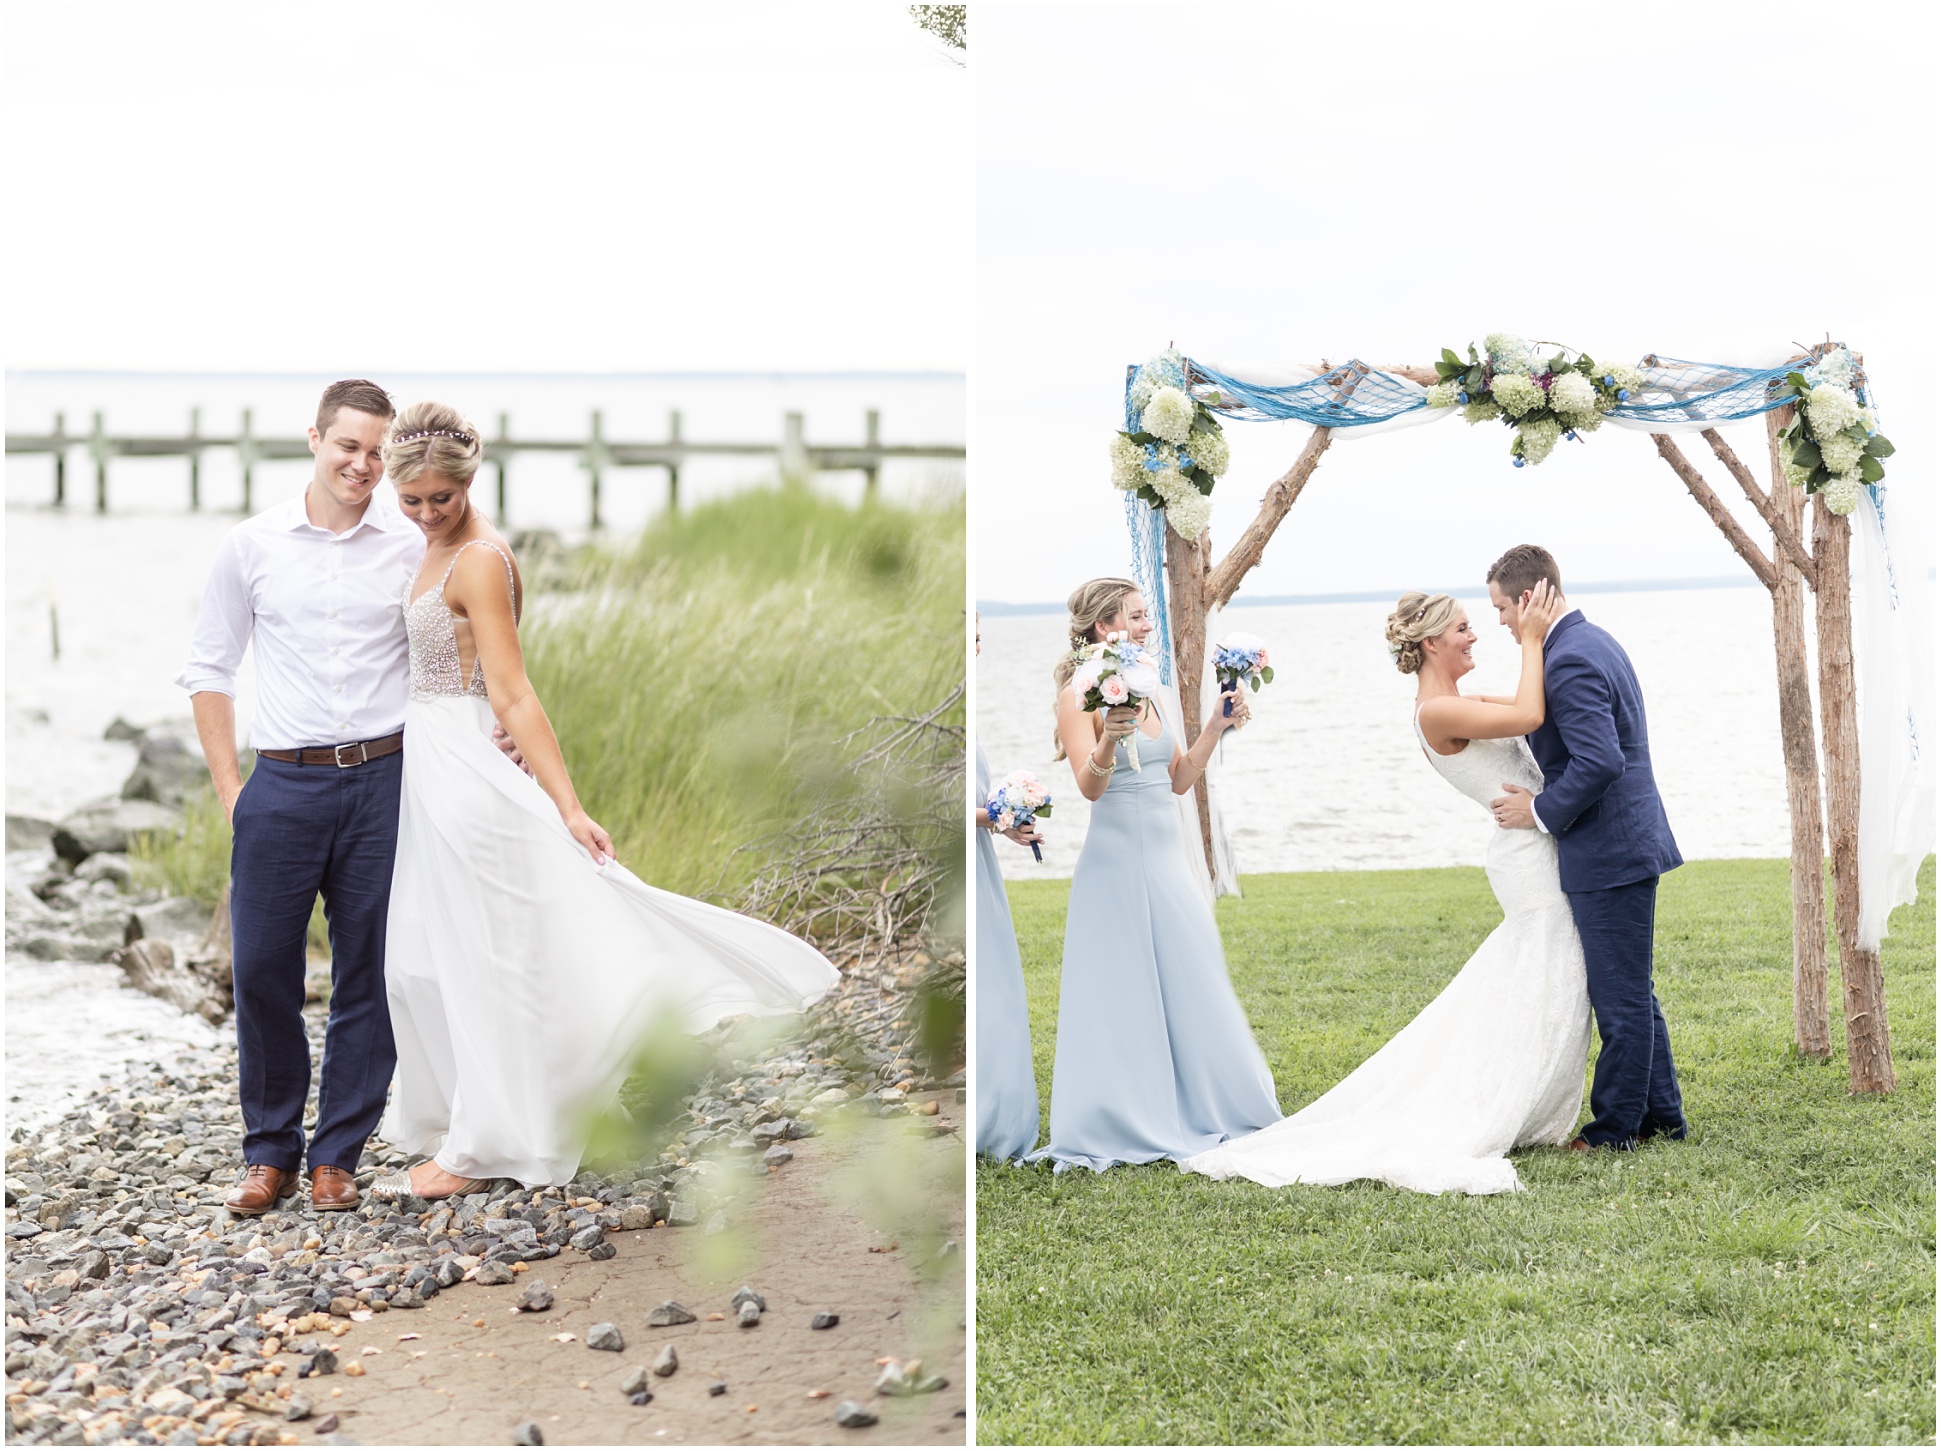 Two images of the bride and groom. The left image is of the bride and groom on the beach. The right image is right after the kiss at the ceremony.